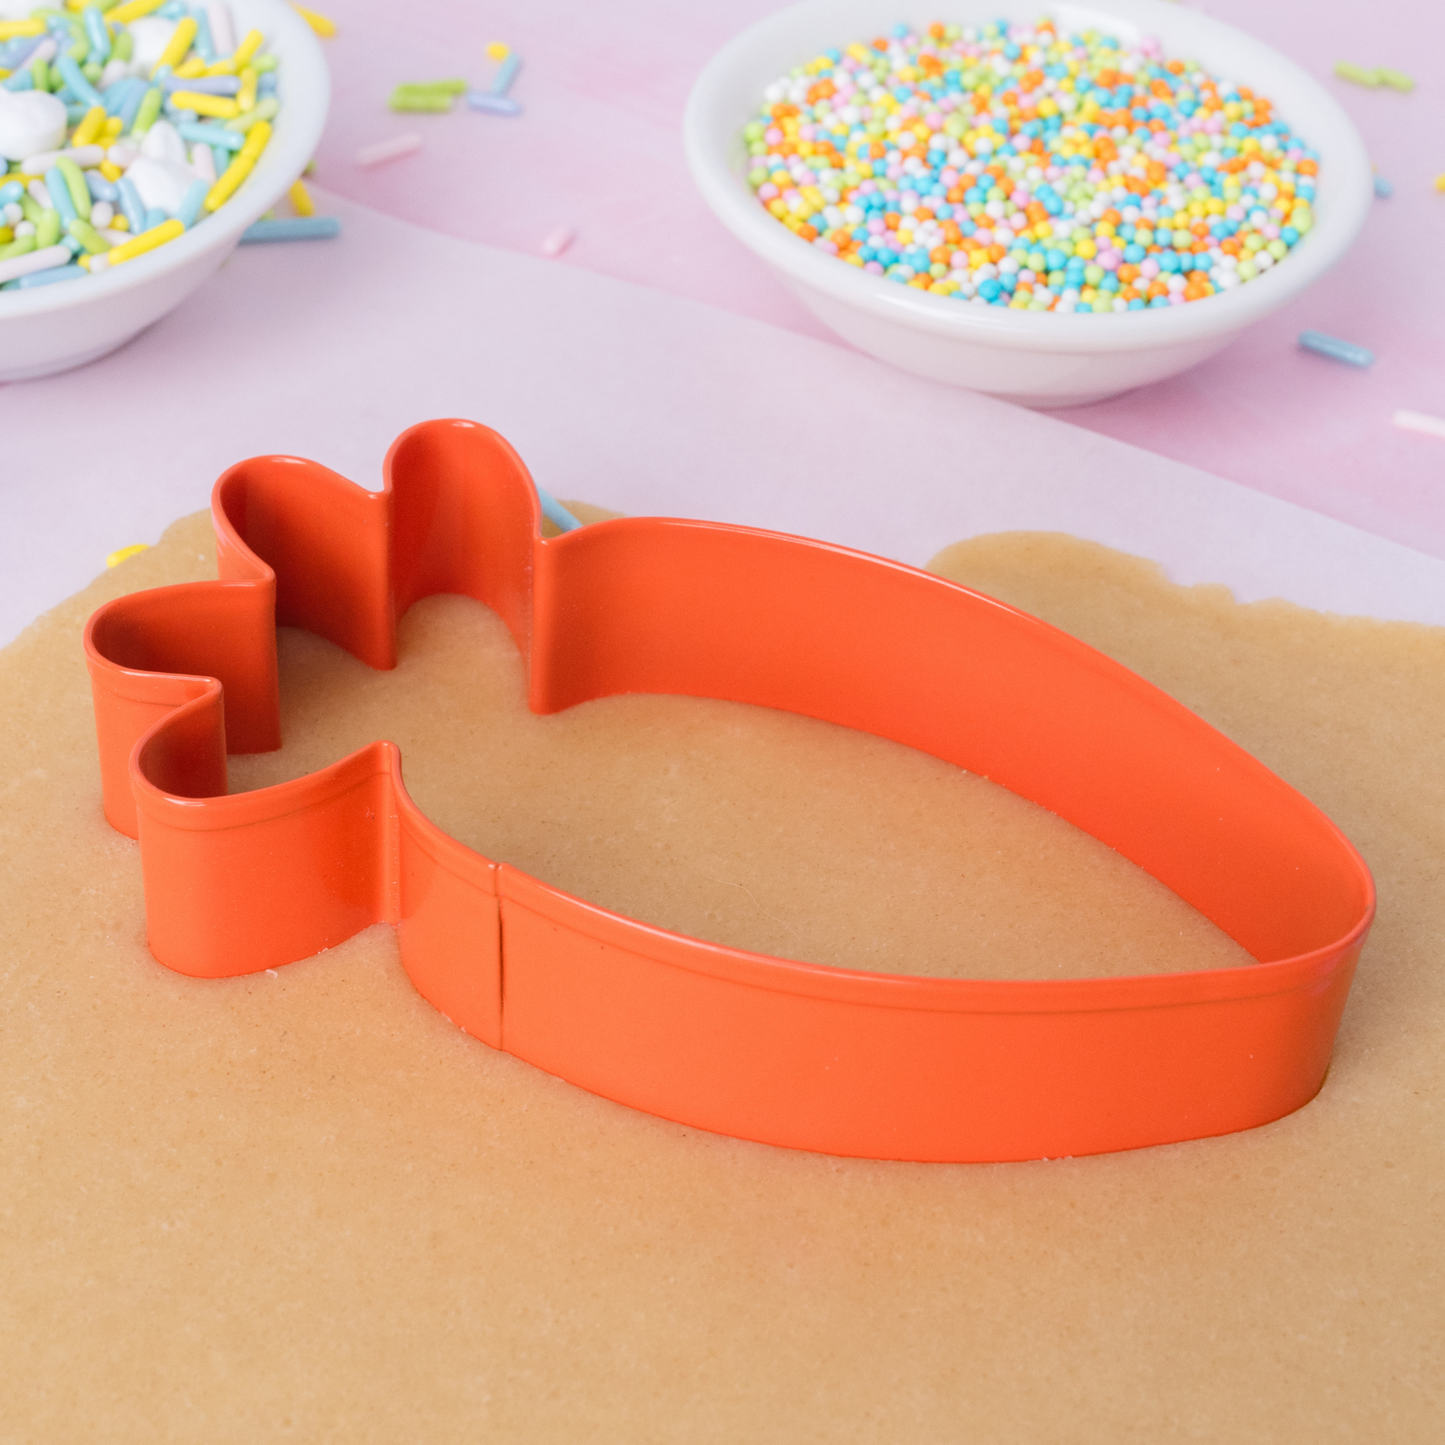 Colorful Carrot Cookie Cutter